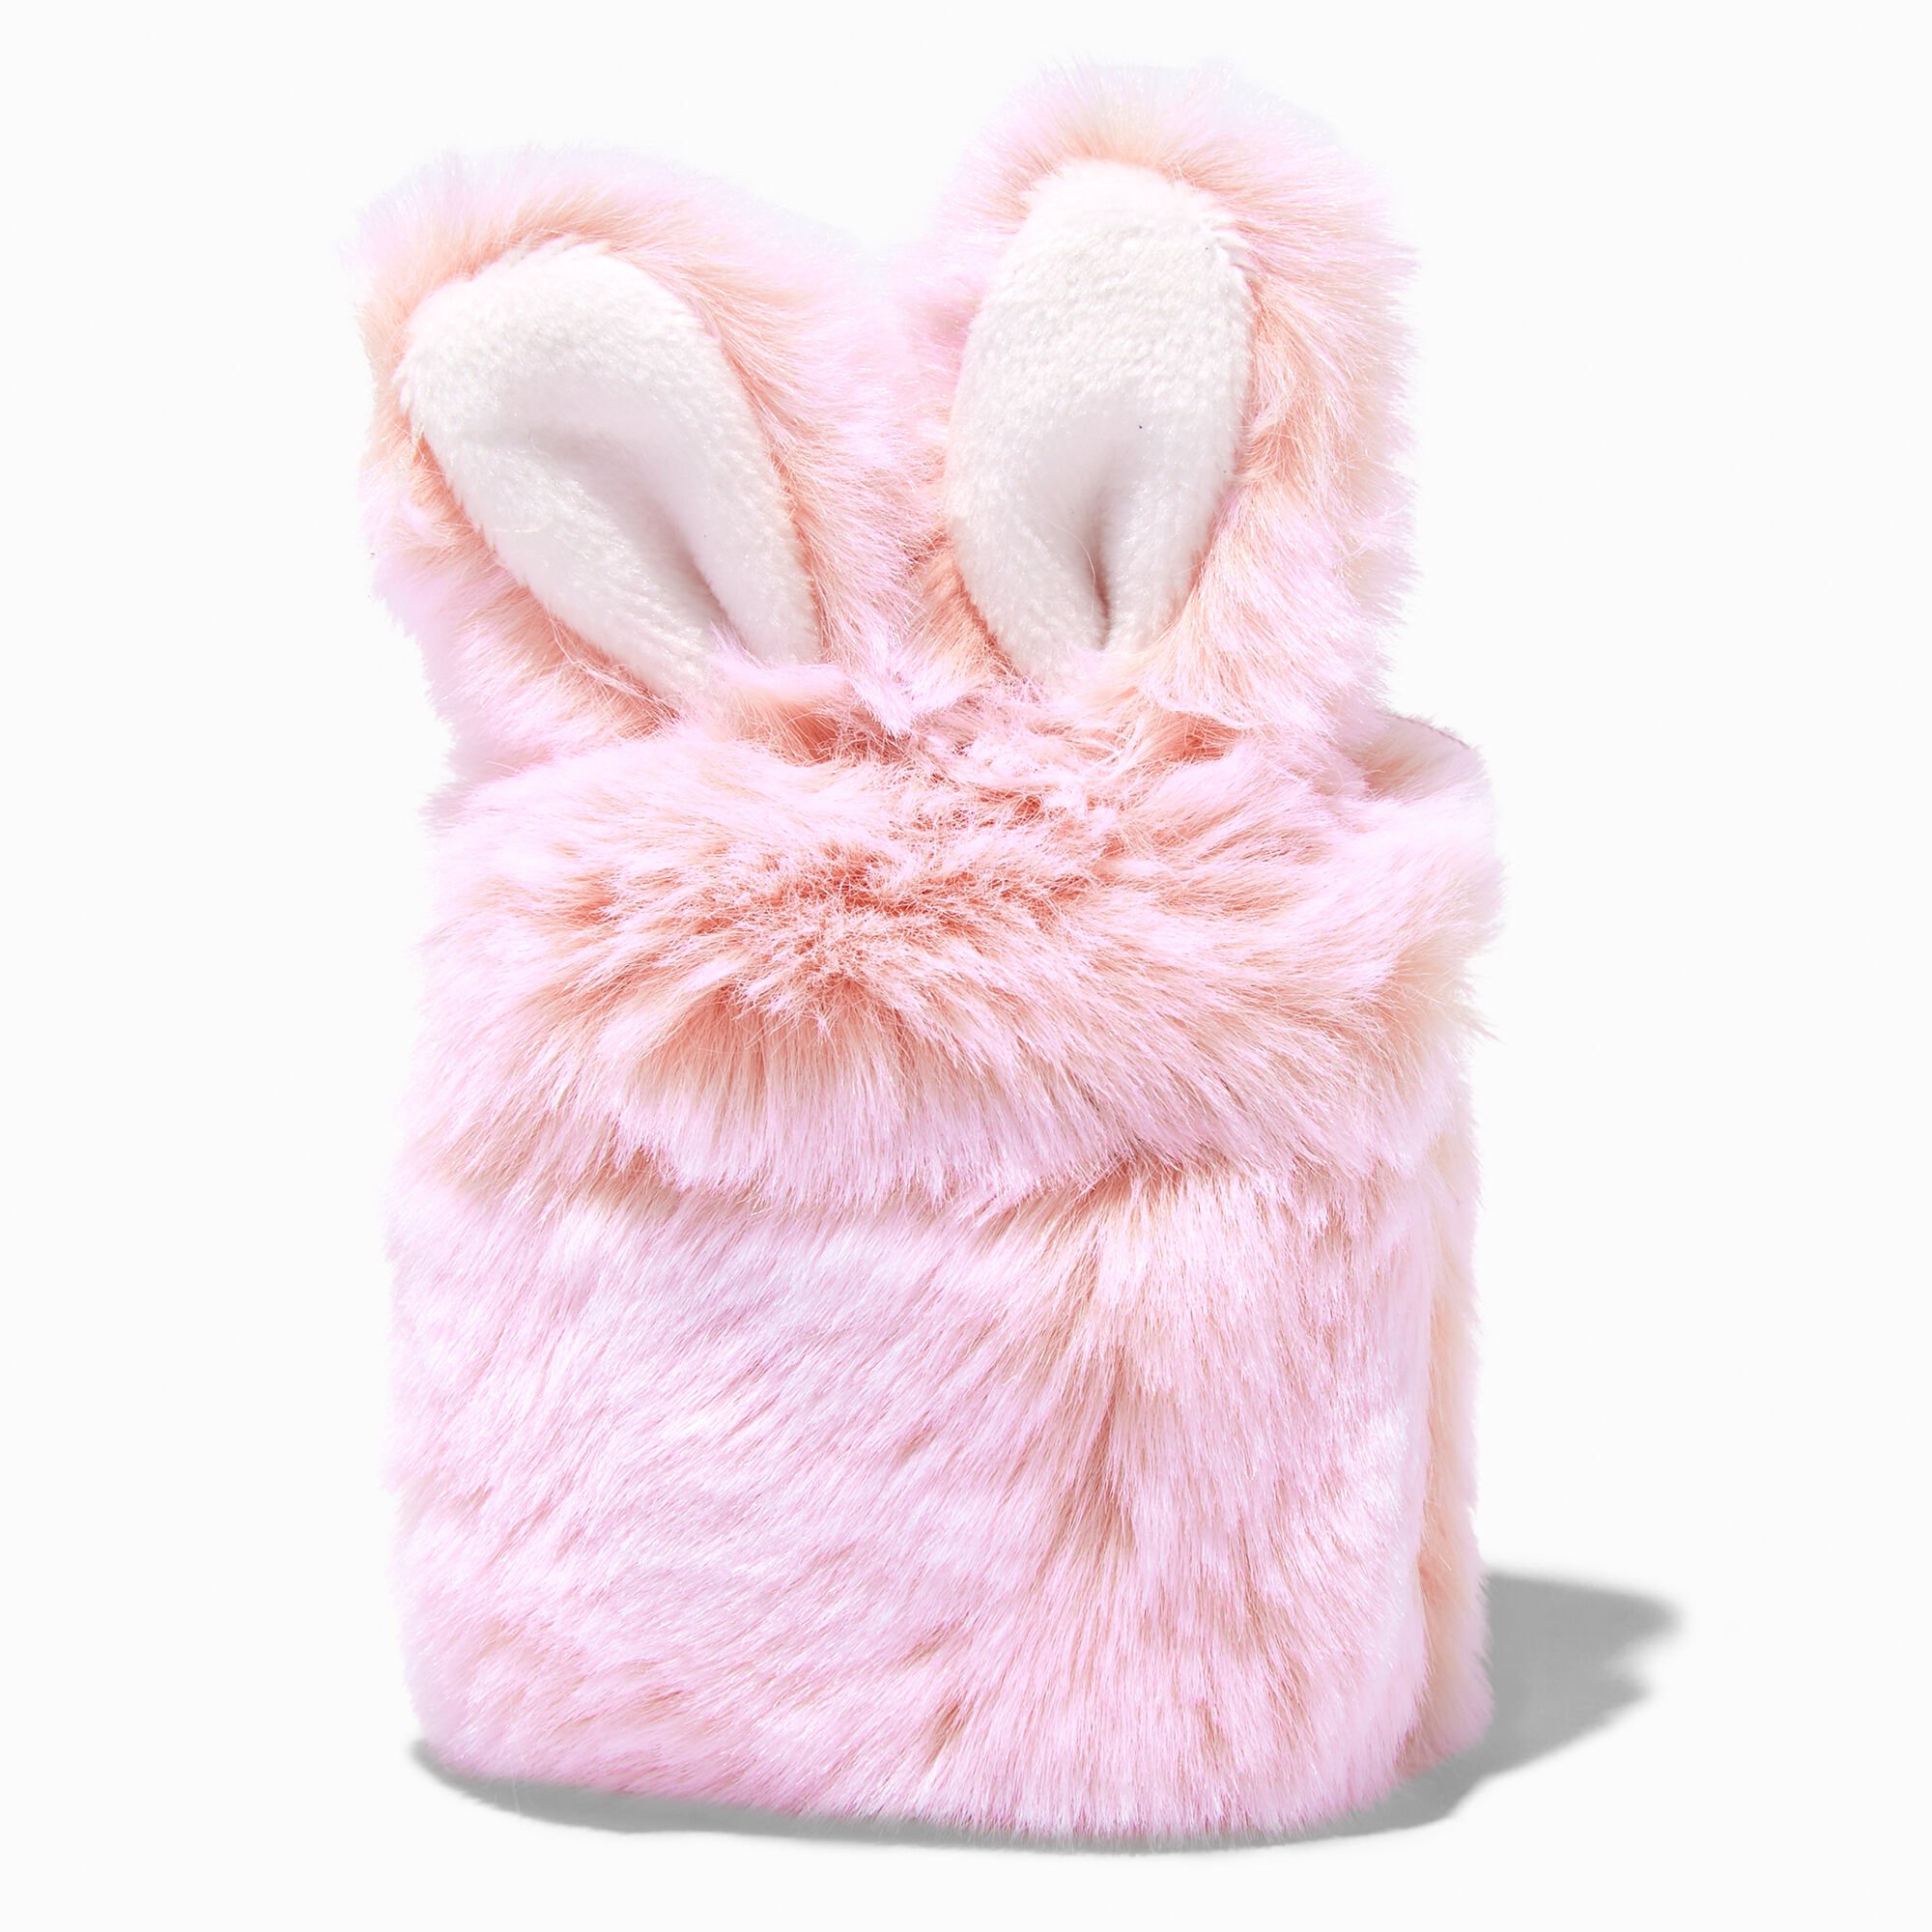 View Claires Furry Bunny Earbud Case Cover Compatible With Apple Airpods Pink information